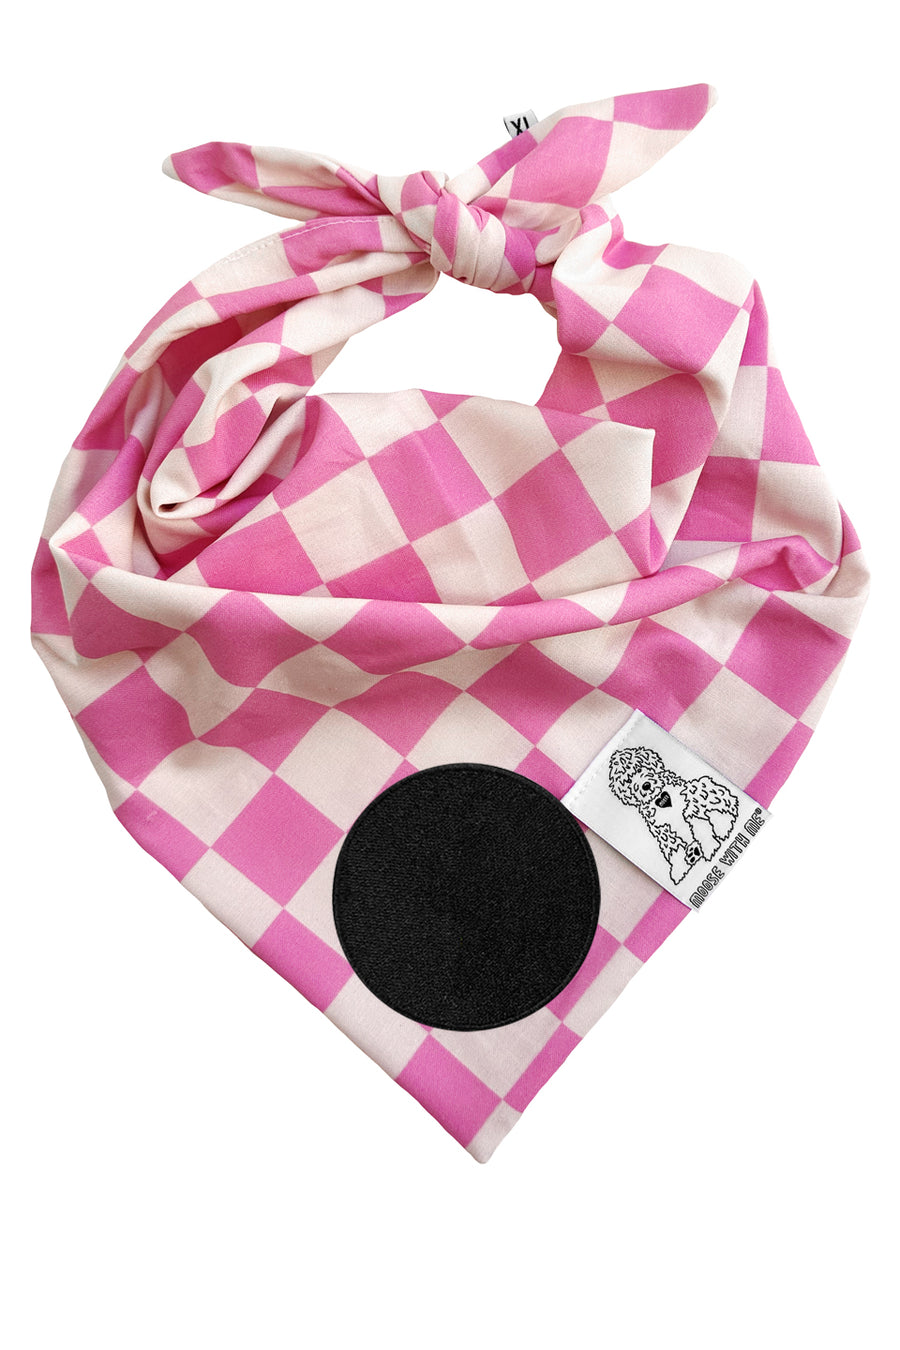 Dog Bandana Checkered - Customize with Interchangeable Velcro Patches